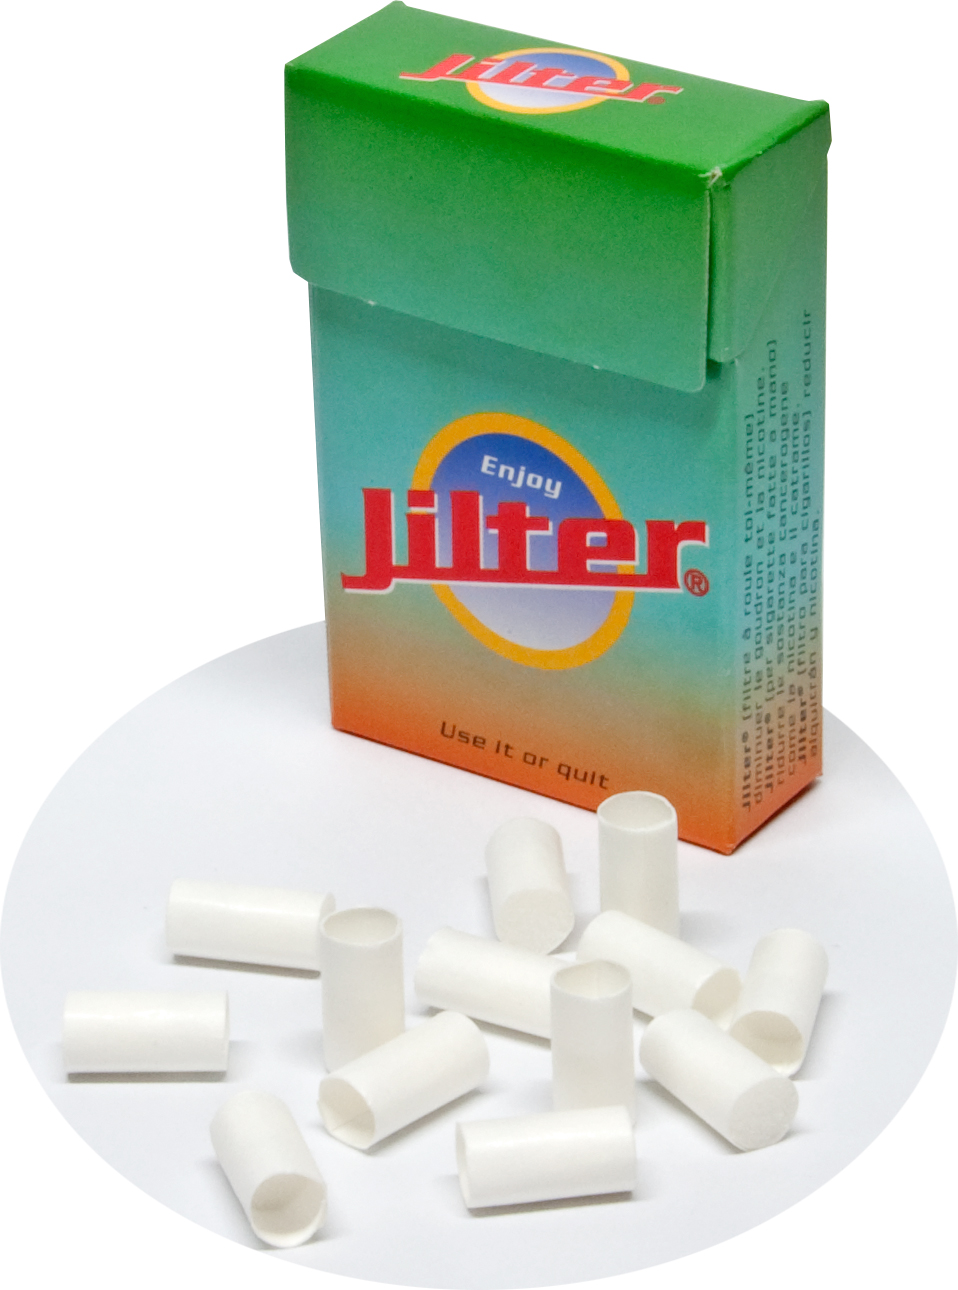 Jilter by Zwister Eindrehfilter 45 Stk